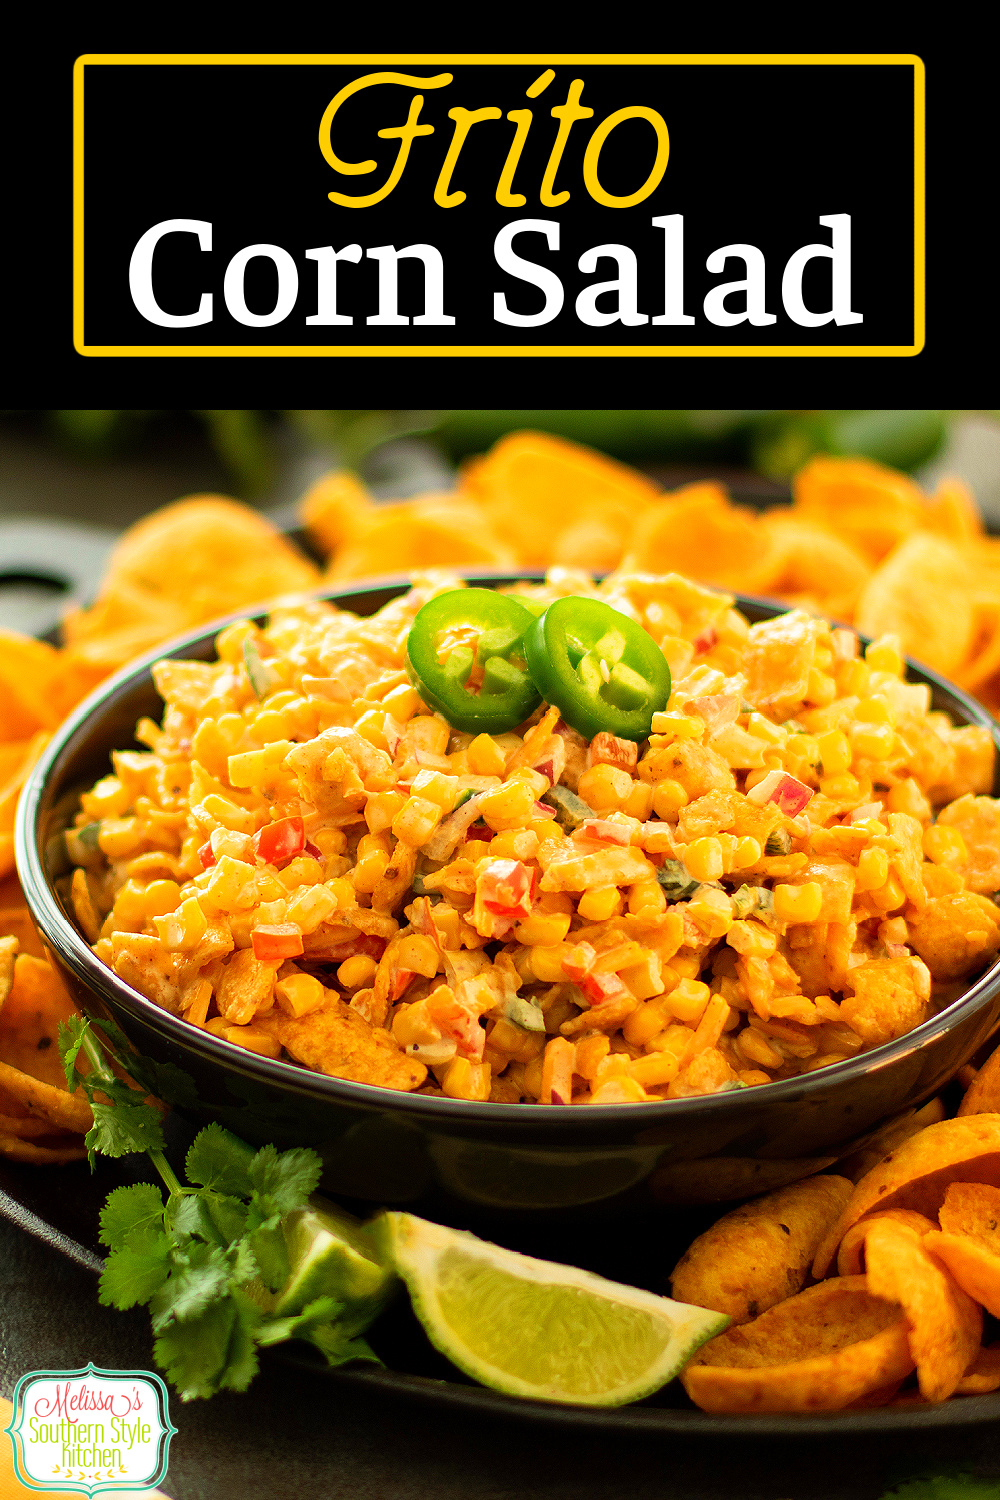 Serve this crunchy Frito Corn Salad as a side dish or an appetizer with Fritos Scoops for dipping. #cornsalad #fritos #fritosalad #fritoscornsalad #saladrecipes #superbowldips #diprecipes #corndip via @melissasssk